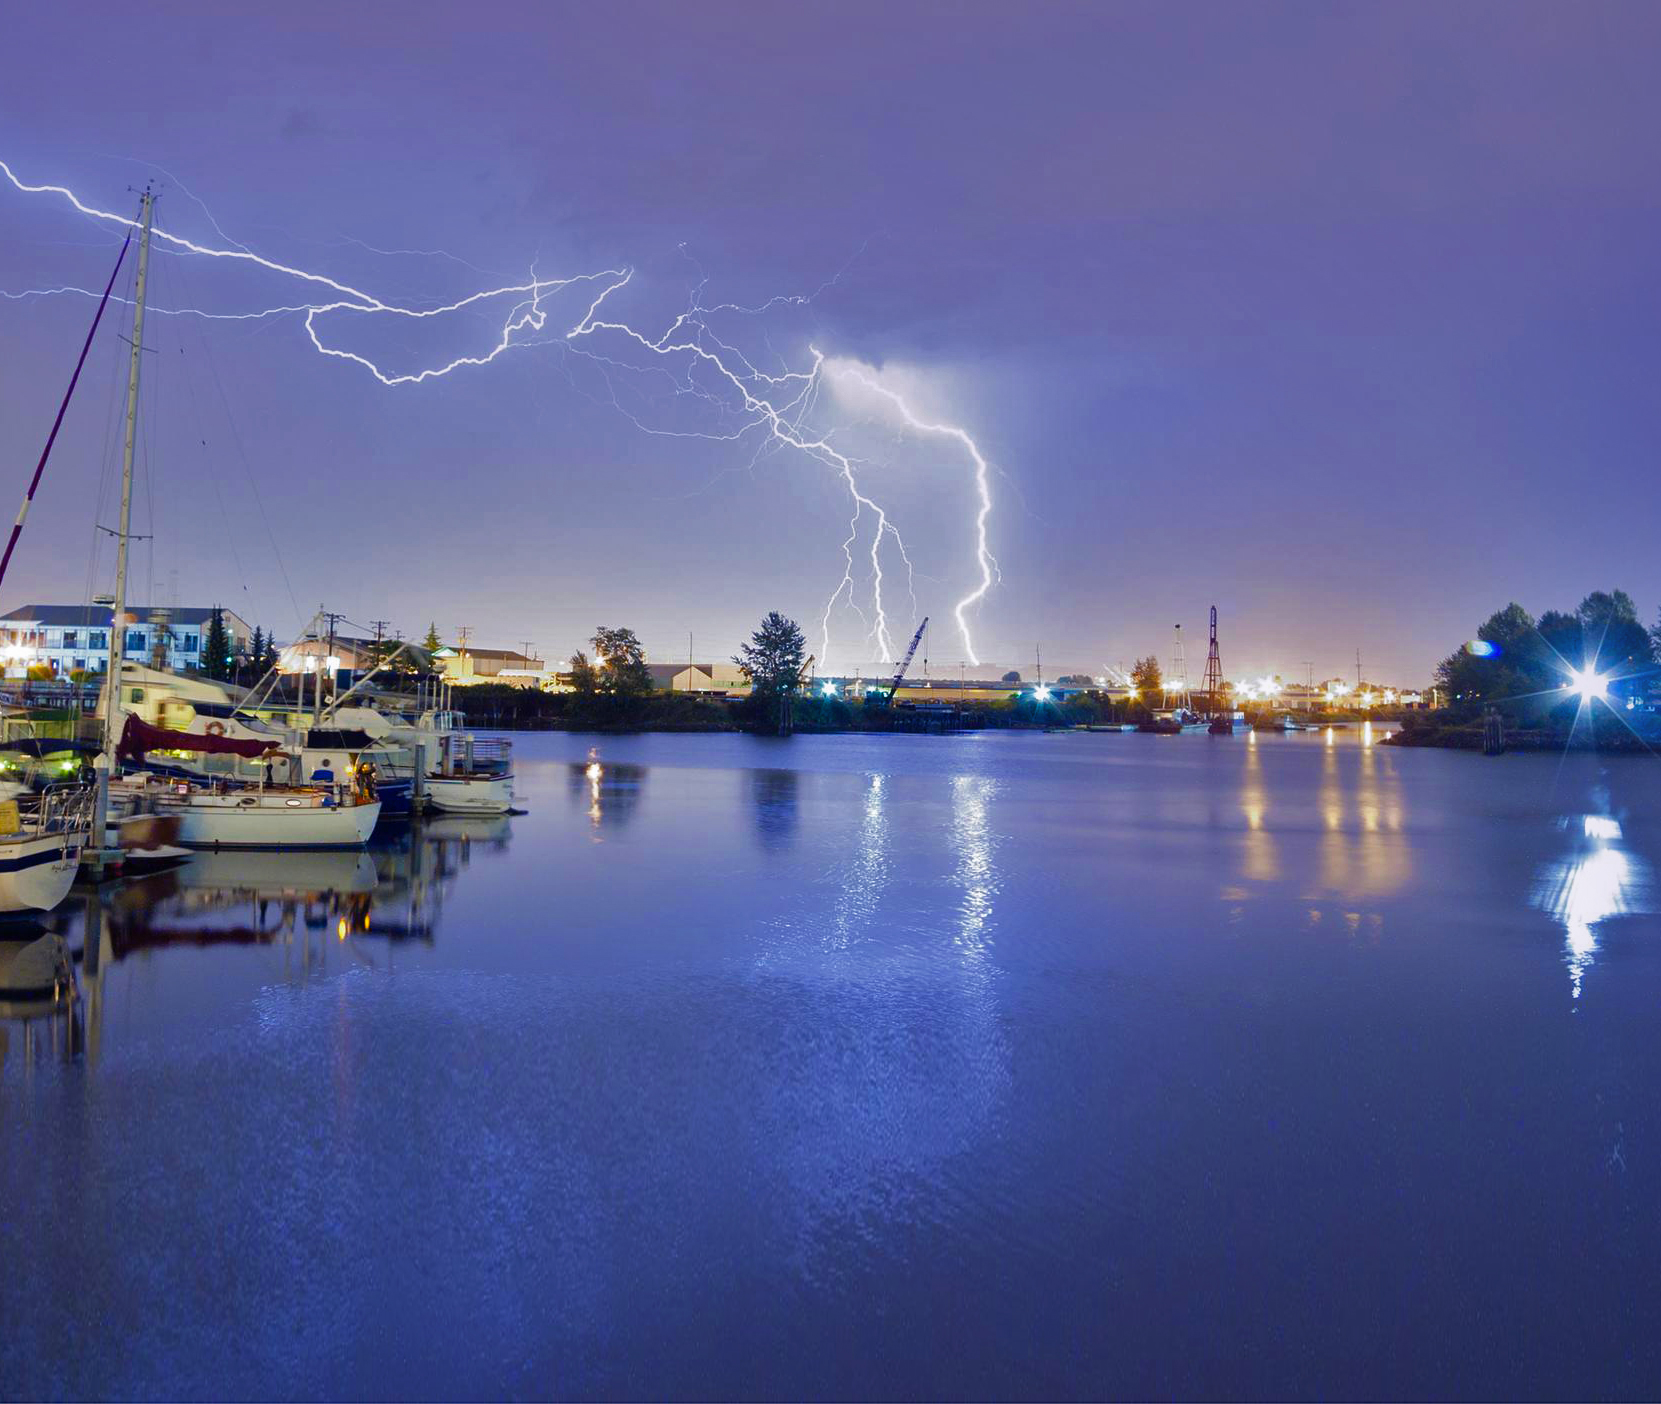 Lightning Strikes And Boats: How To Stay Protected